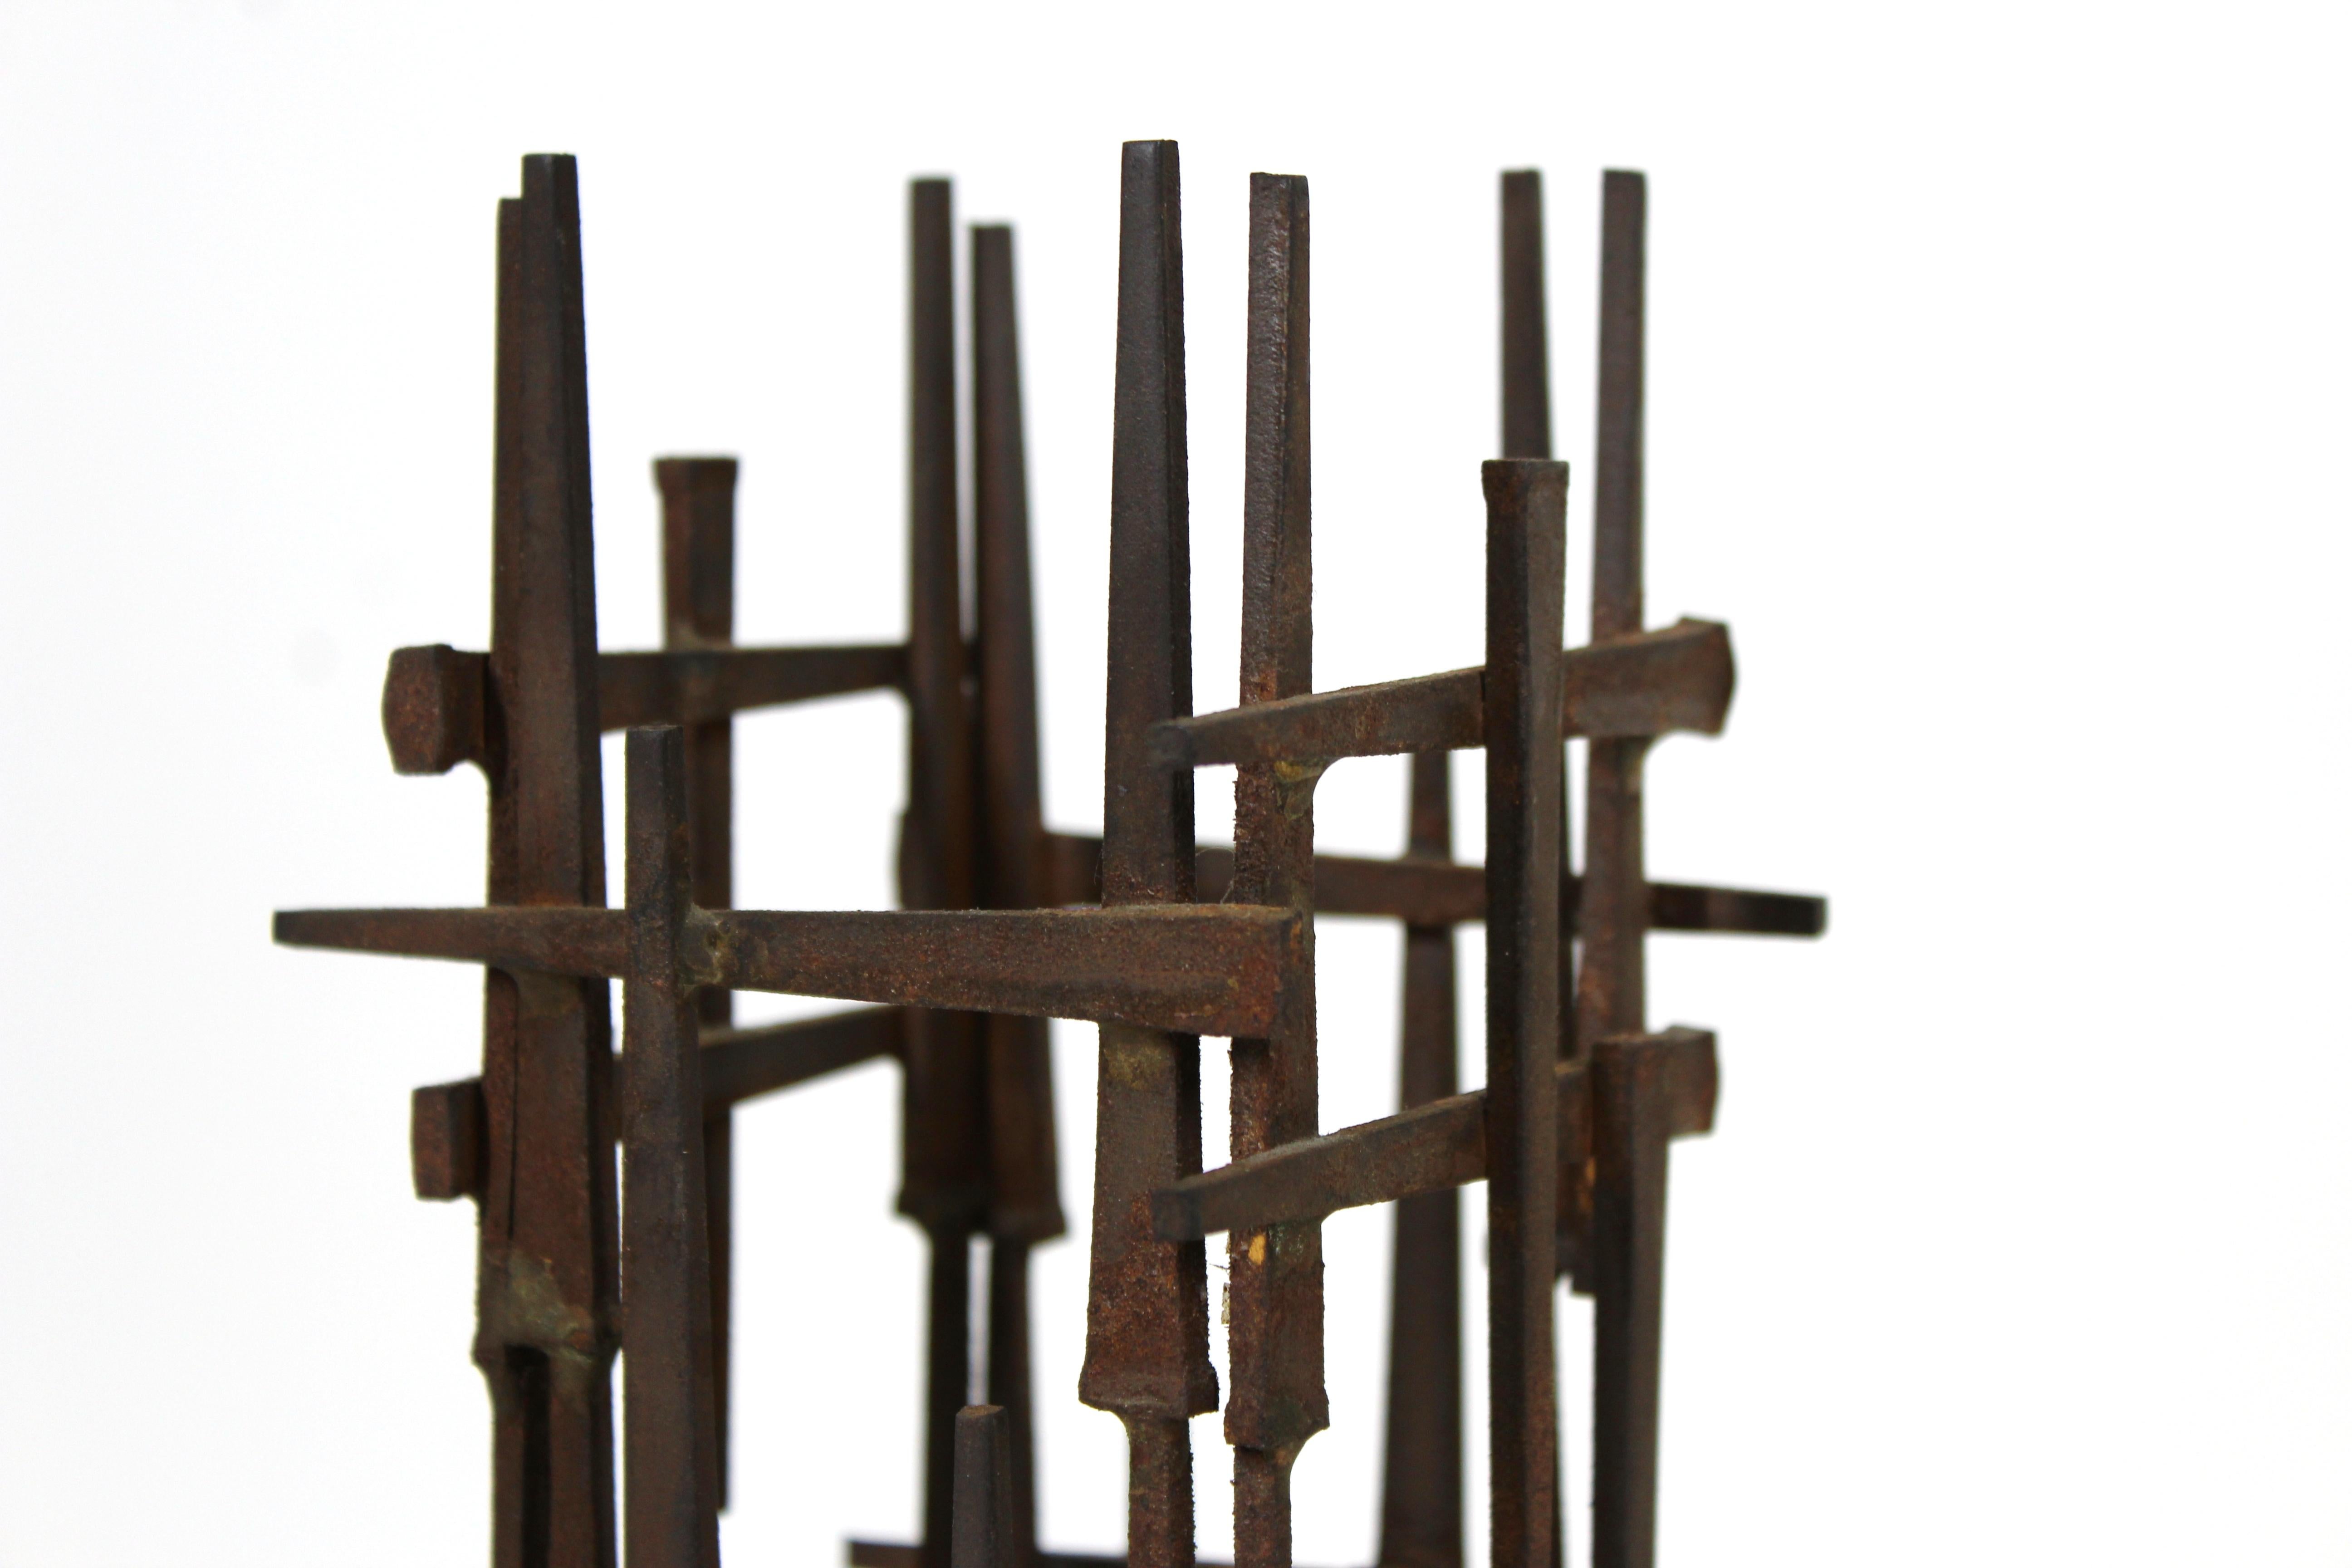 David Grossman Mid-Century Modern Brutalist welded nail tower abstract sculpture, signed on the base.